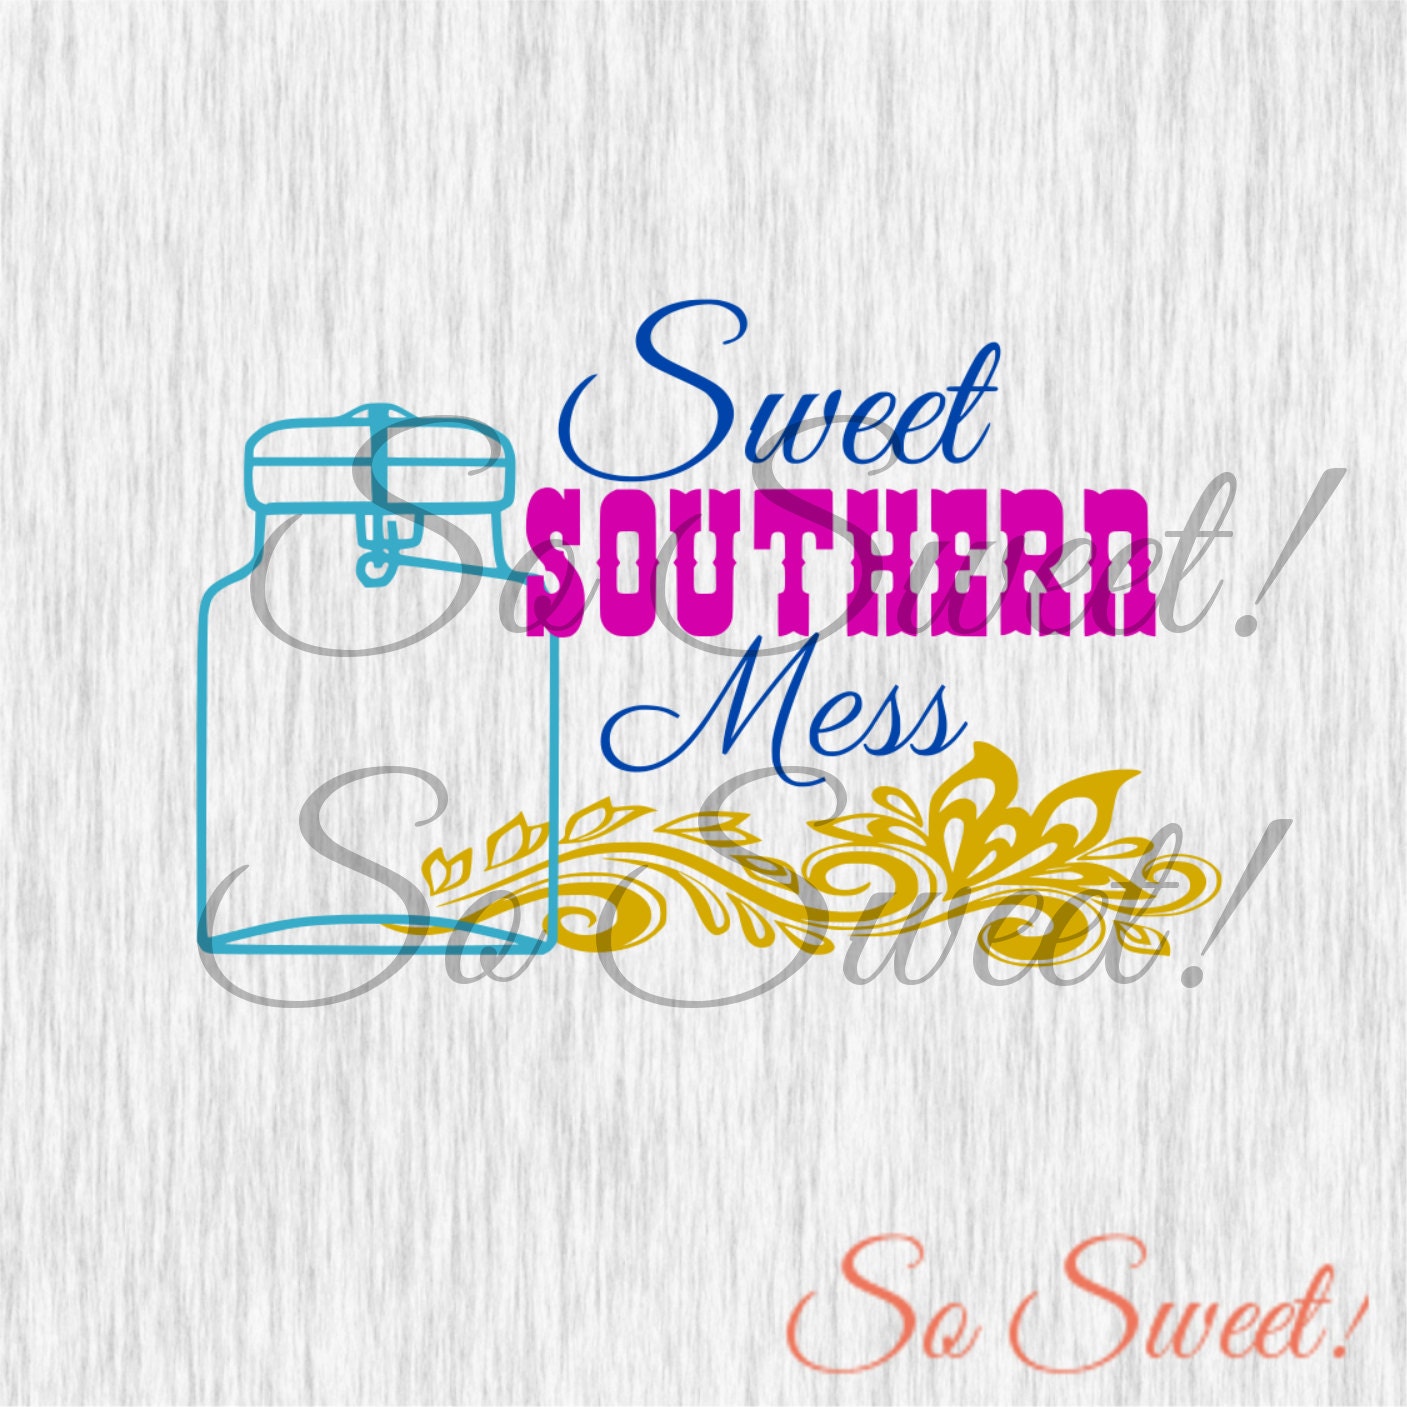 Download Sweet Southern Mess Digital SVG / DXF Cut File for Silhouette